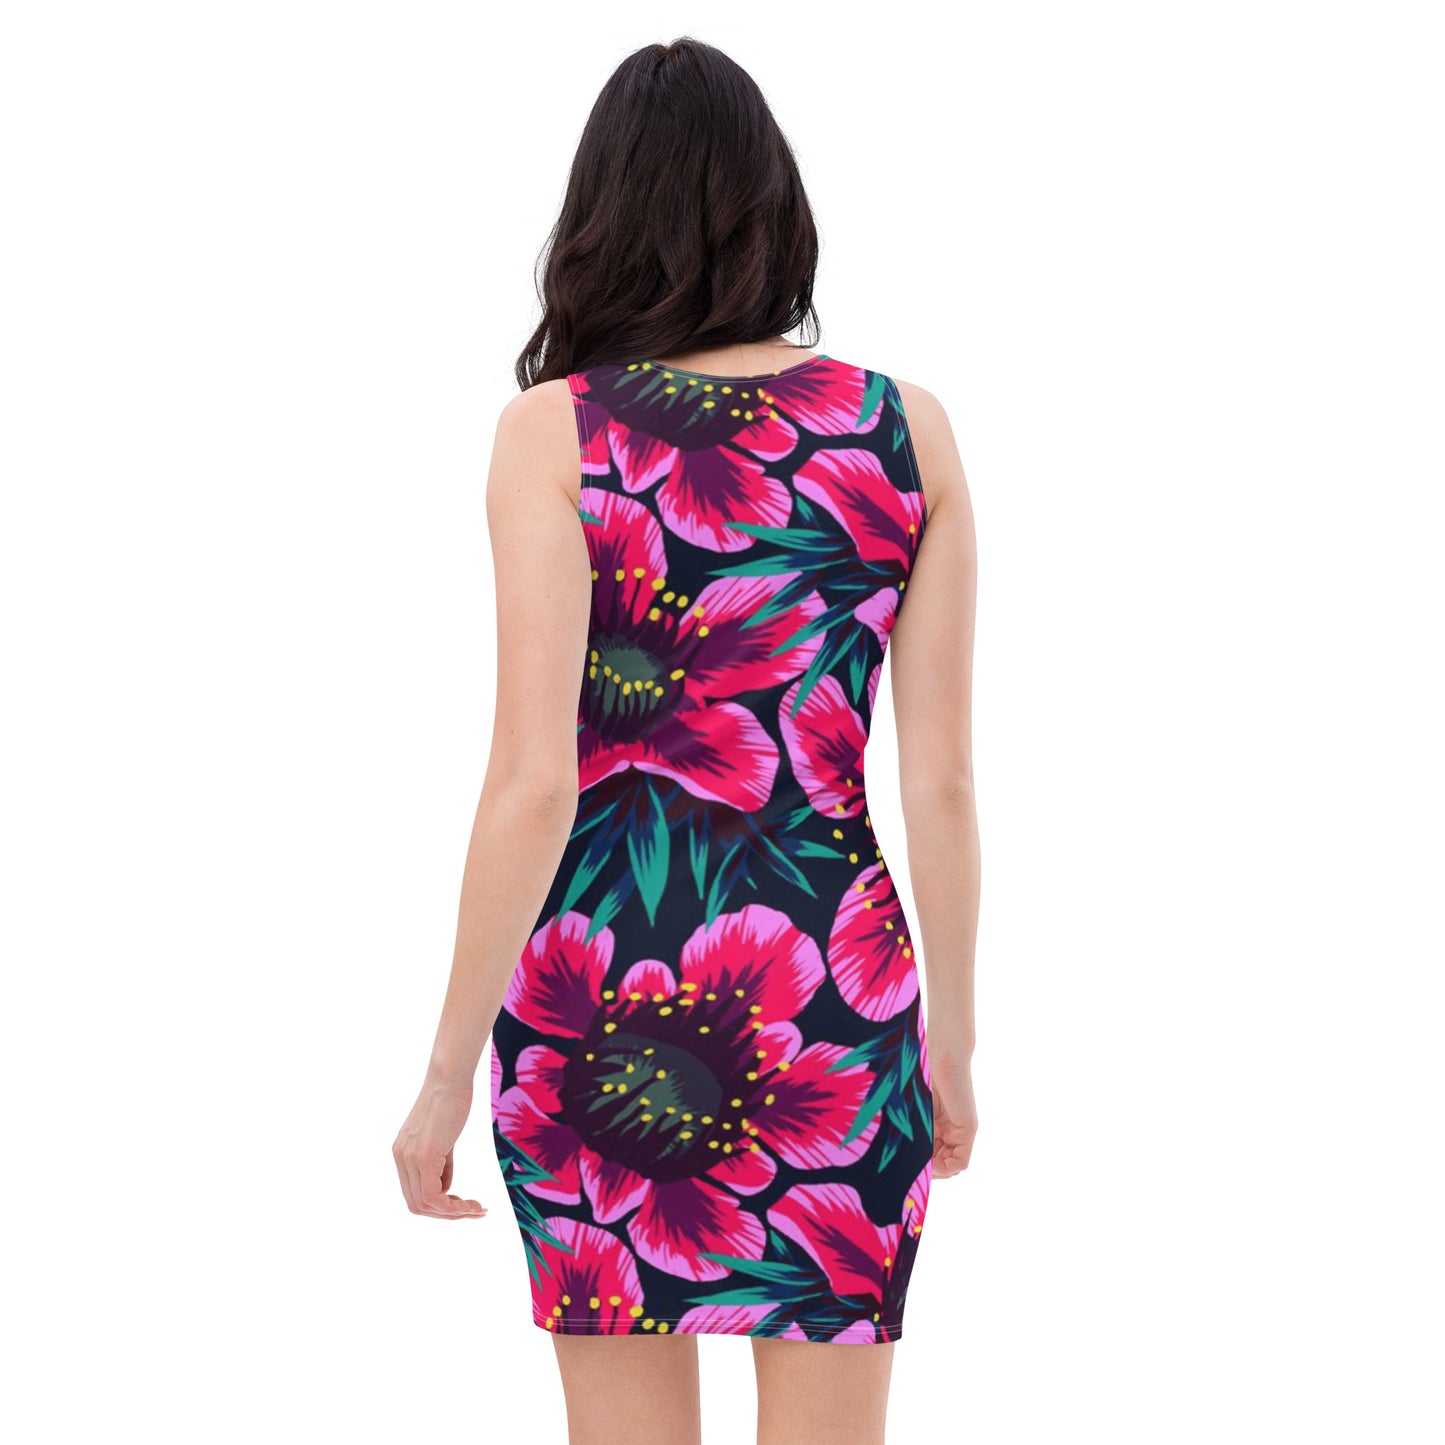 Maadish | Women’s Pink Floral Fitted Dress